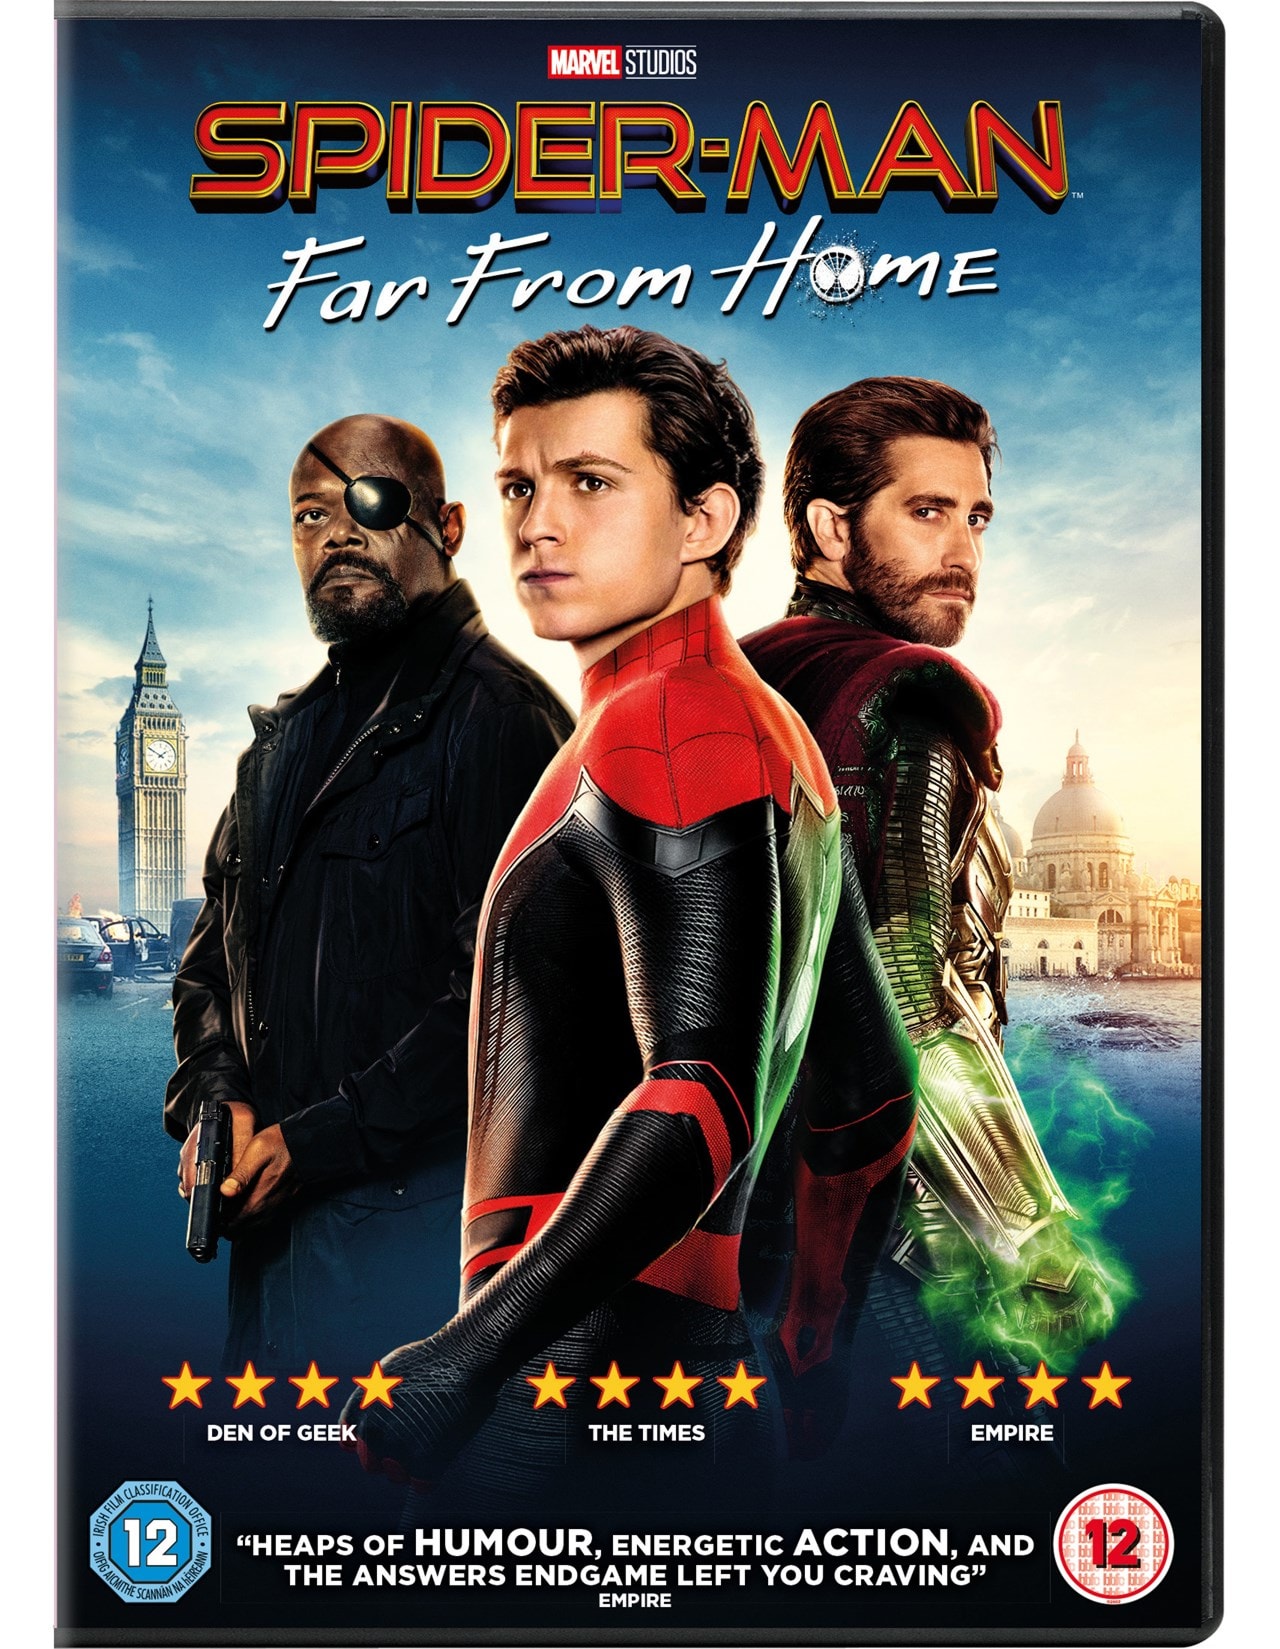 SpiderMan Far from Home DVD Free shipping over £20 HMV Store